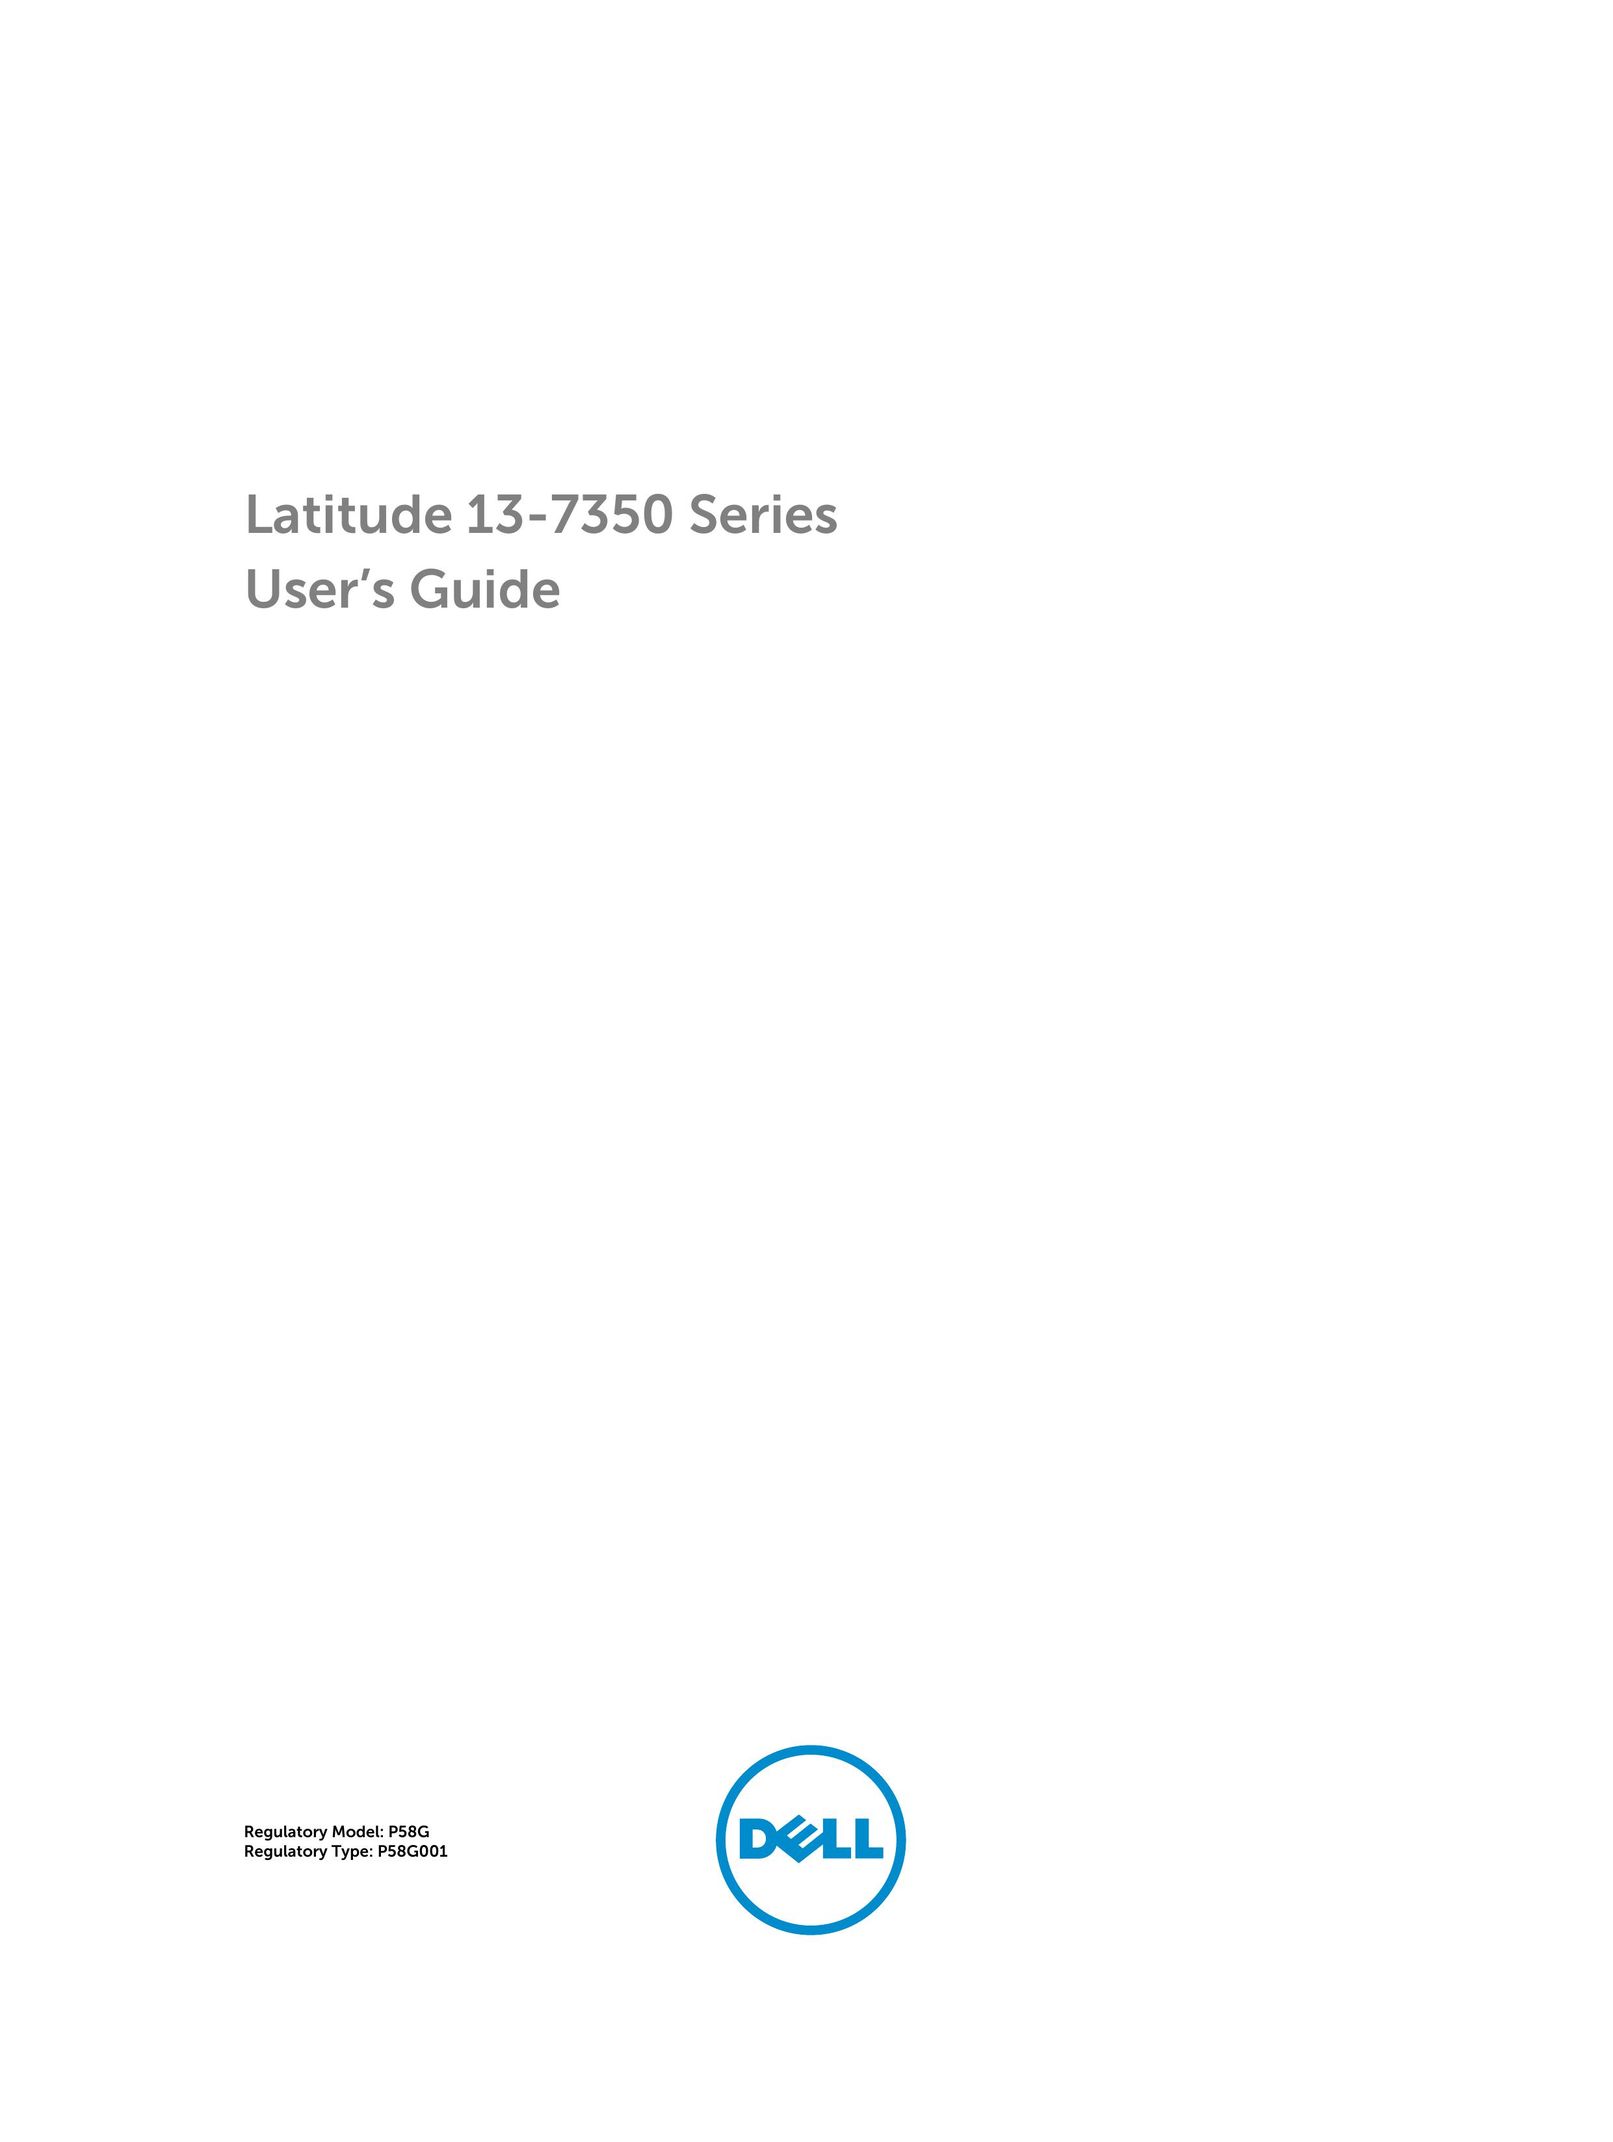 Dell 13-7350 Graphics Tablet User Manual